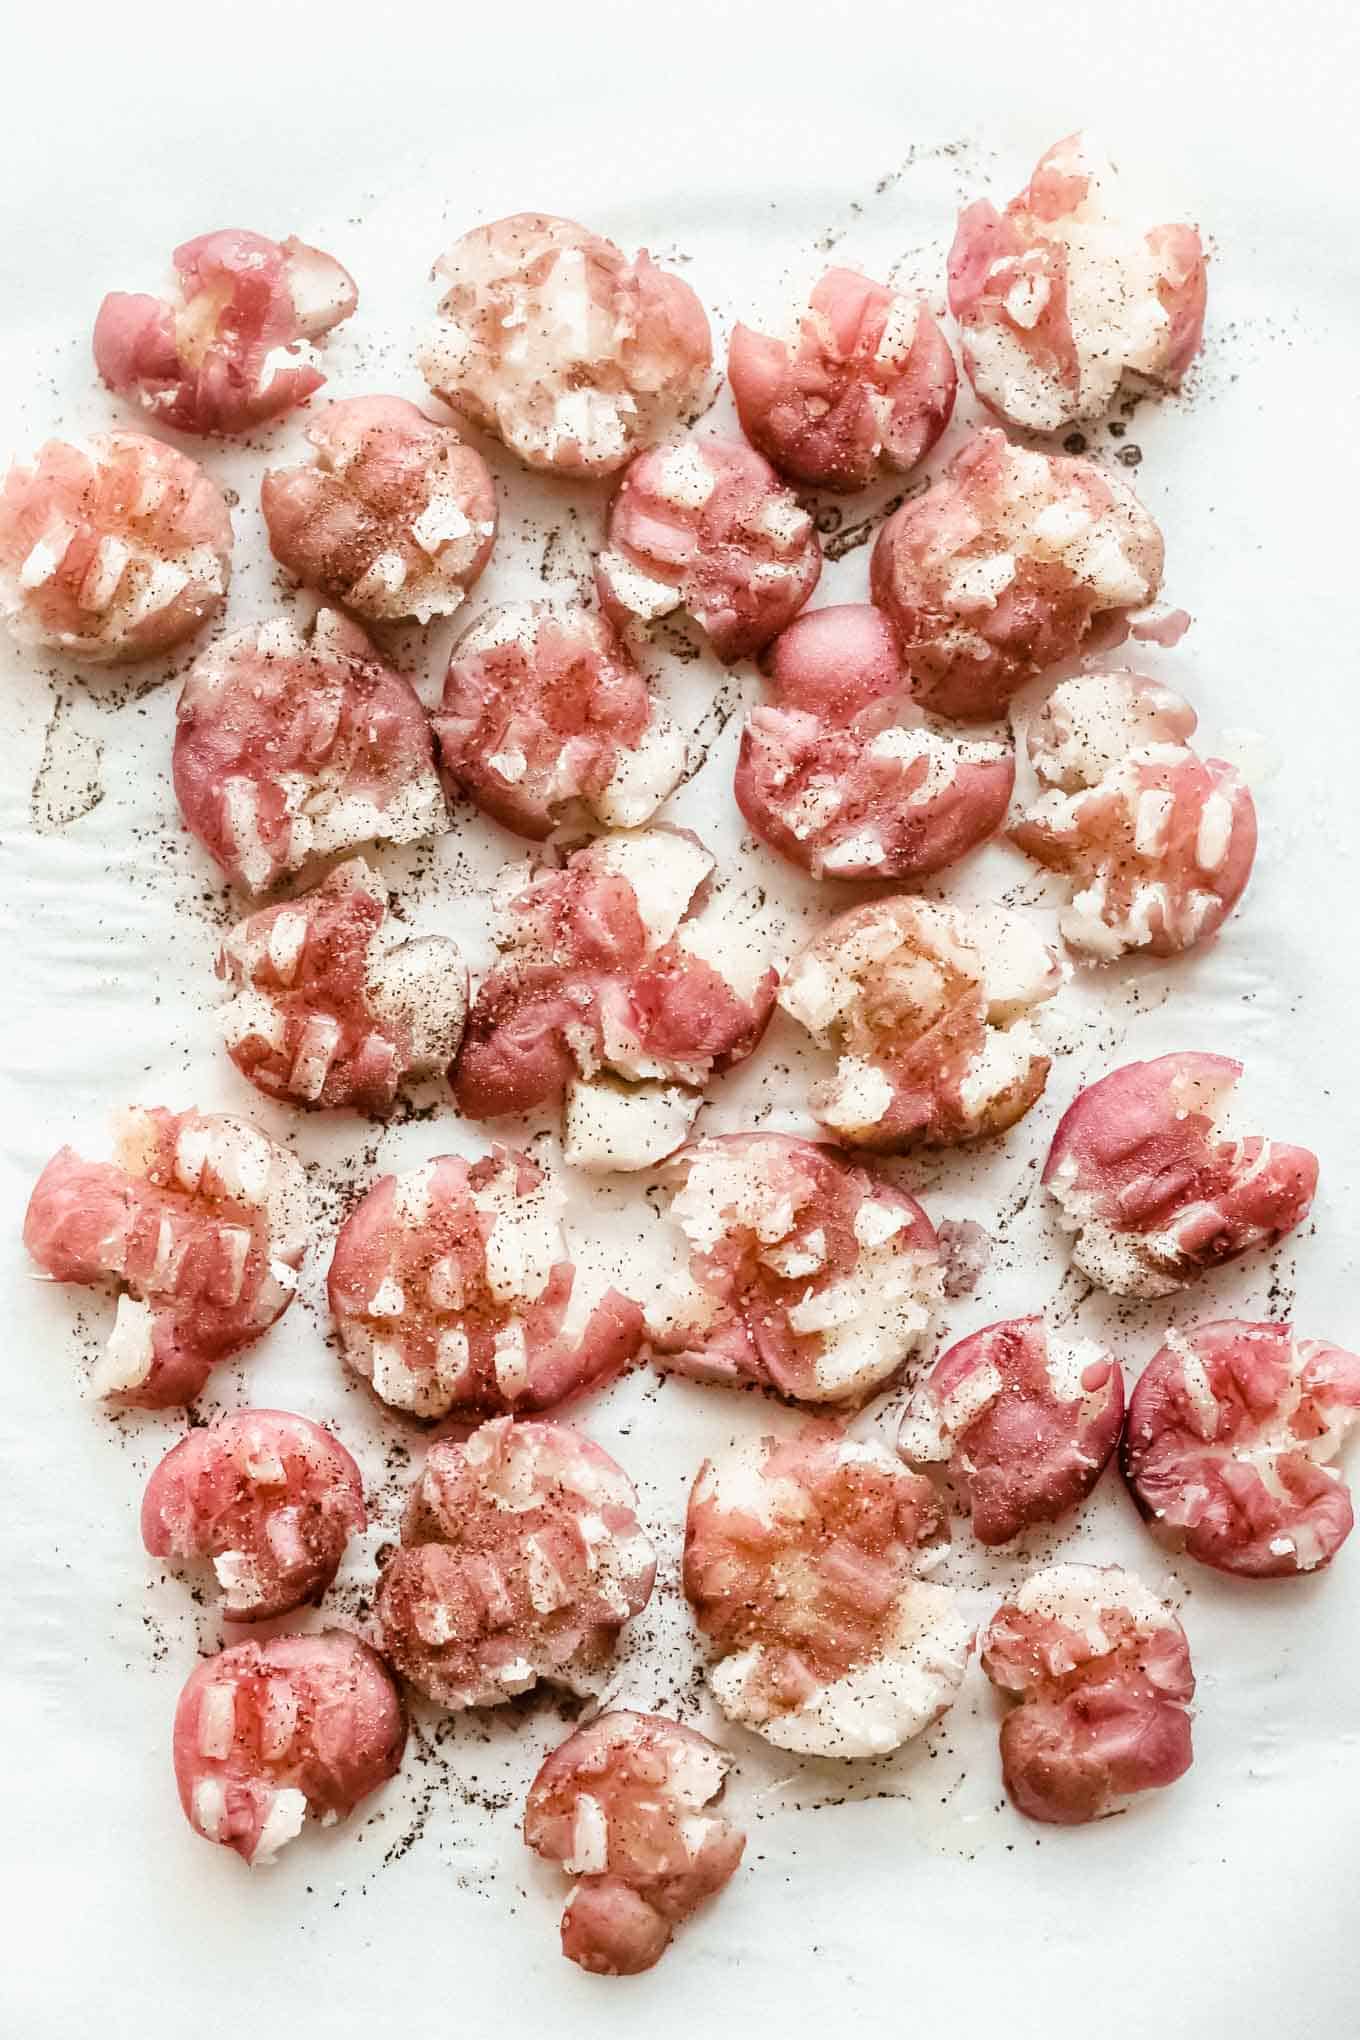 Smashed red potatoes on parchment paper prior to grilling